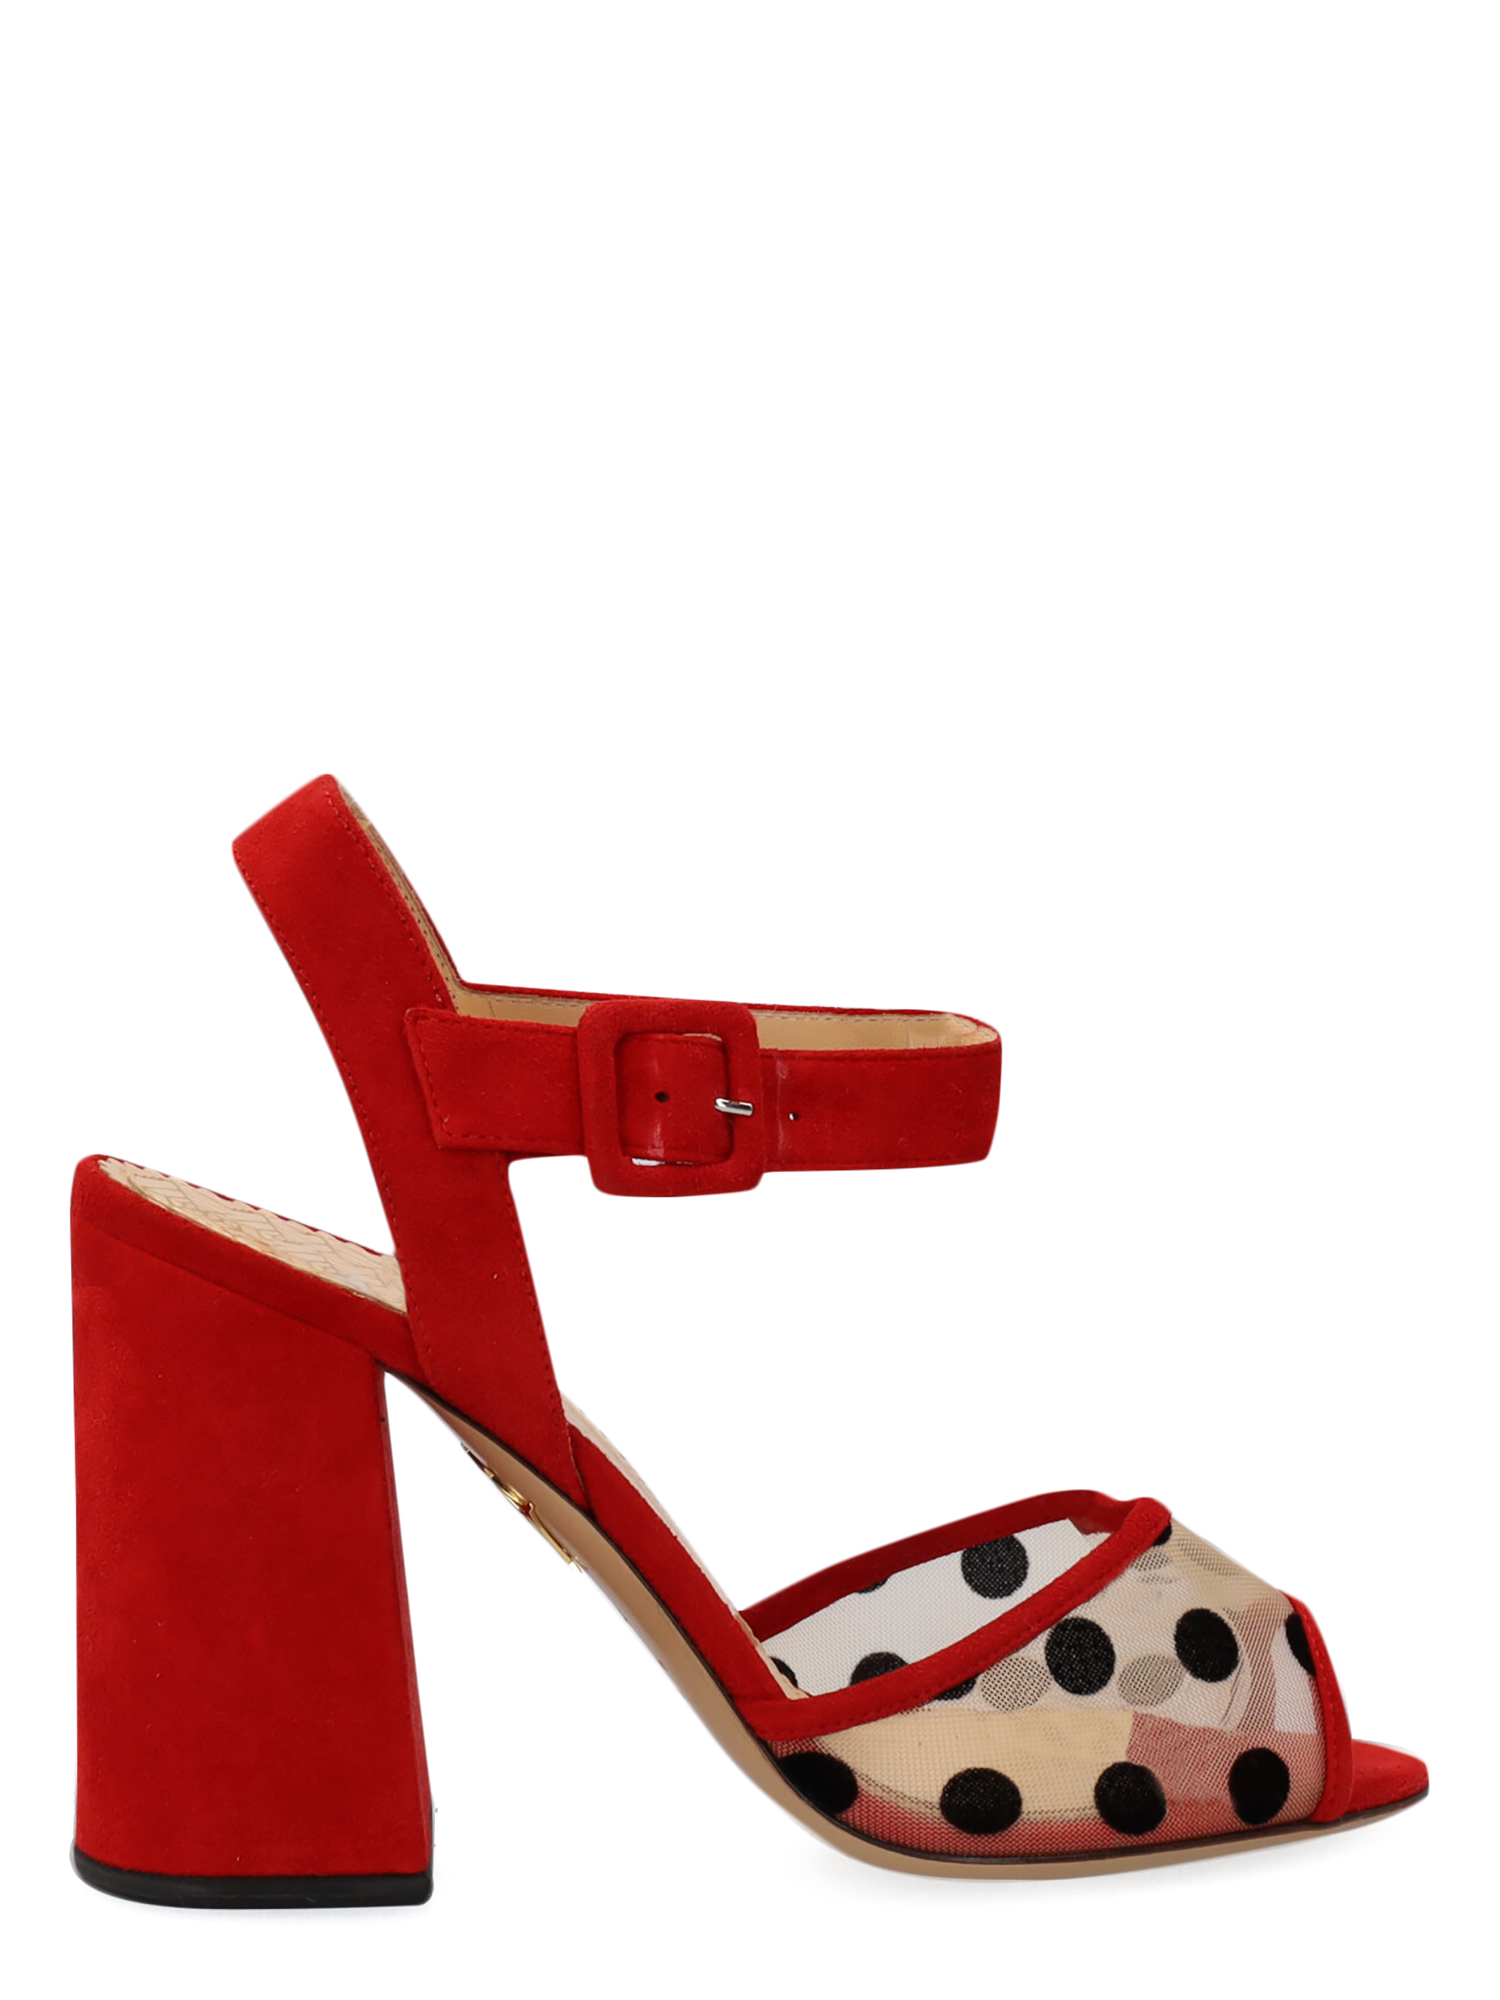 Charlotte Olympia Femme Sandales Red Leather